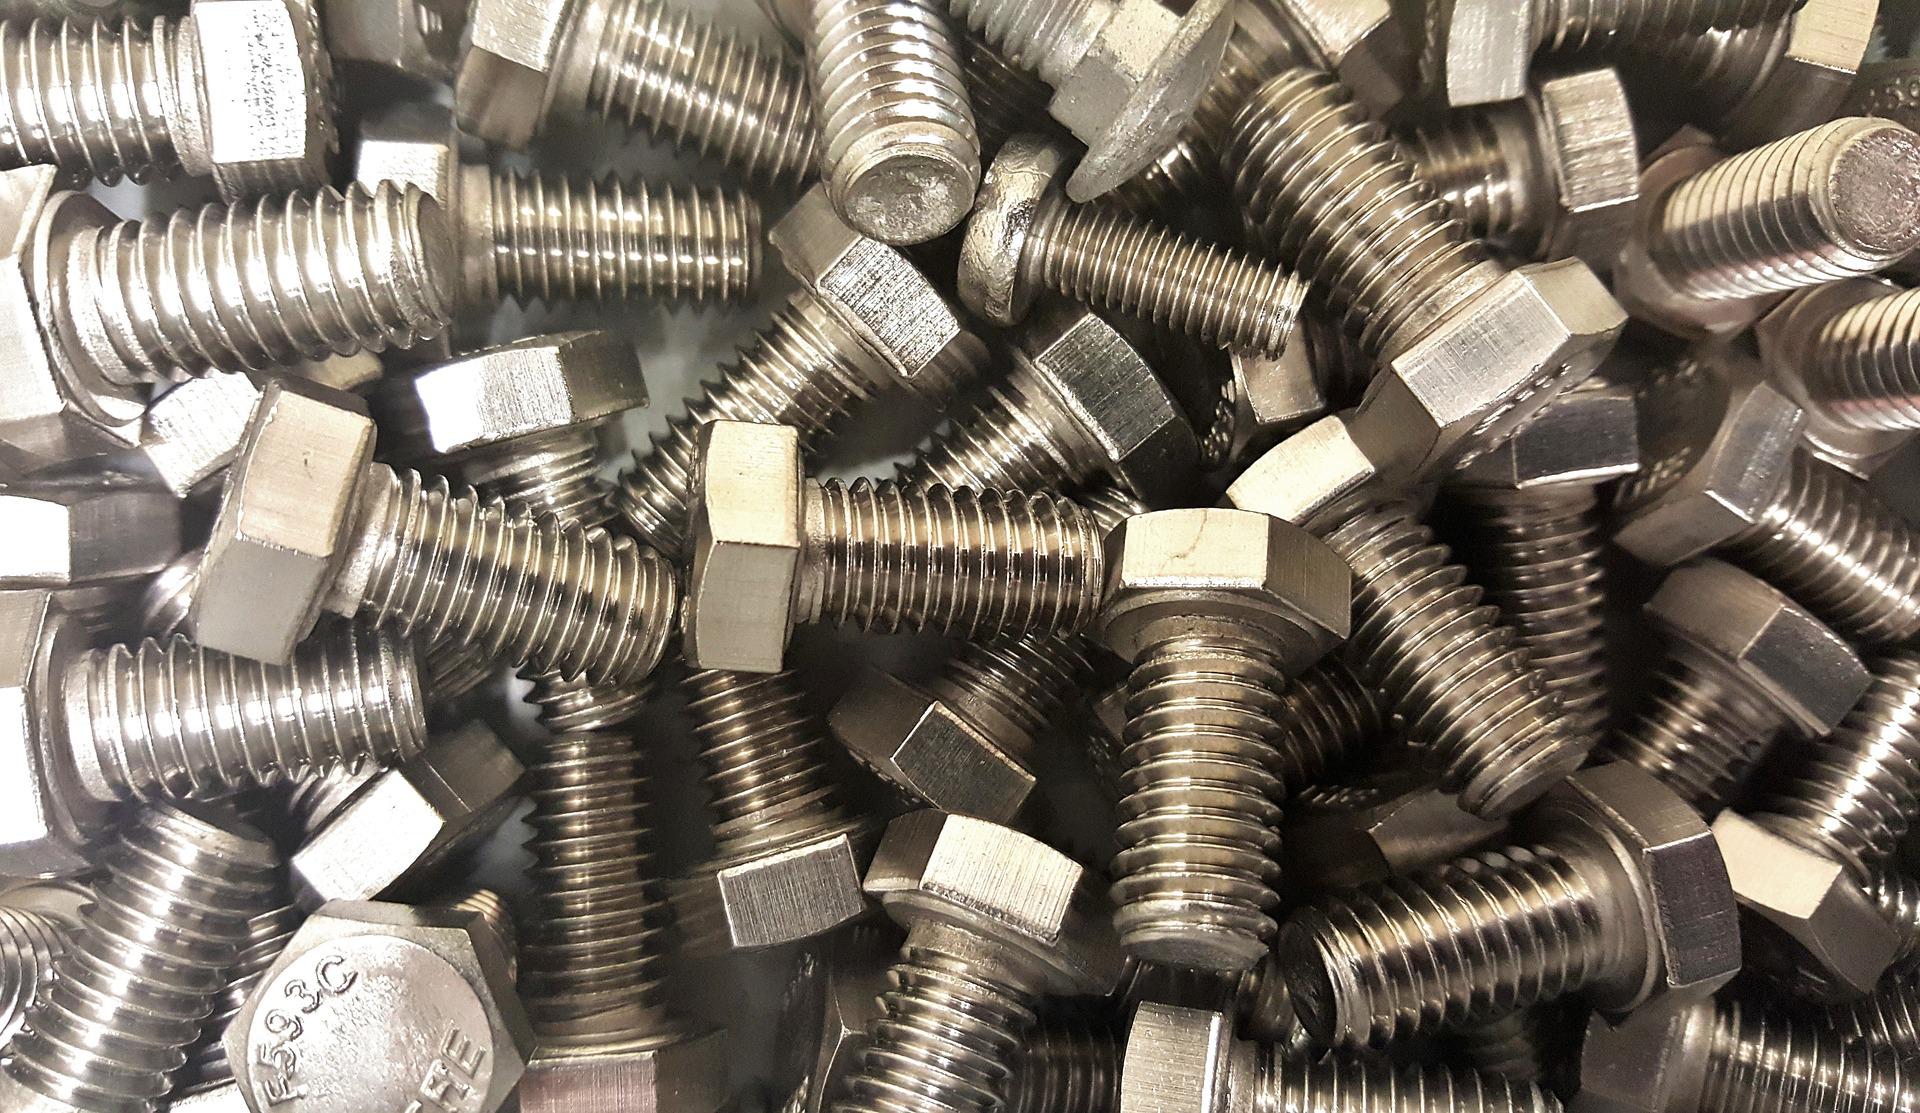 What are the Different Types of Fixing Screws?